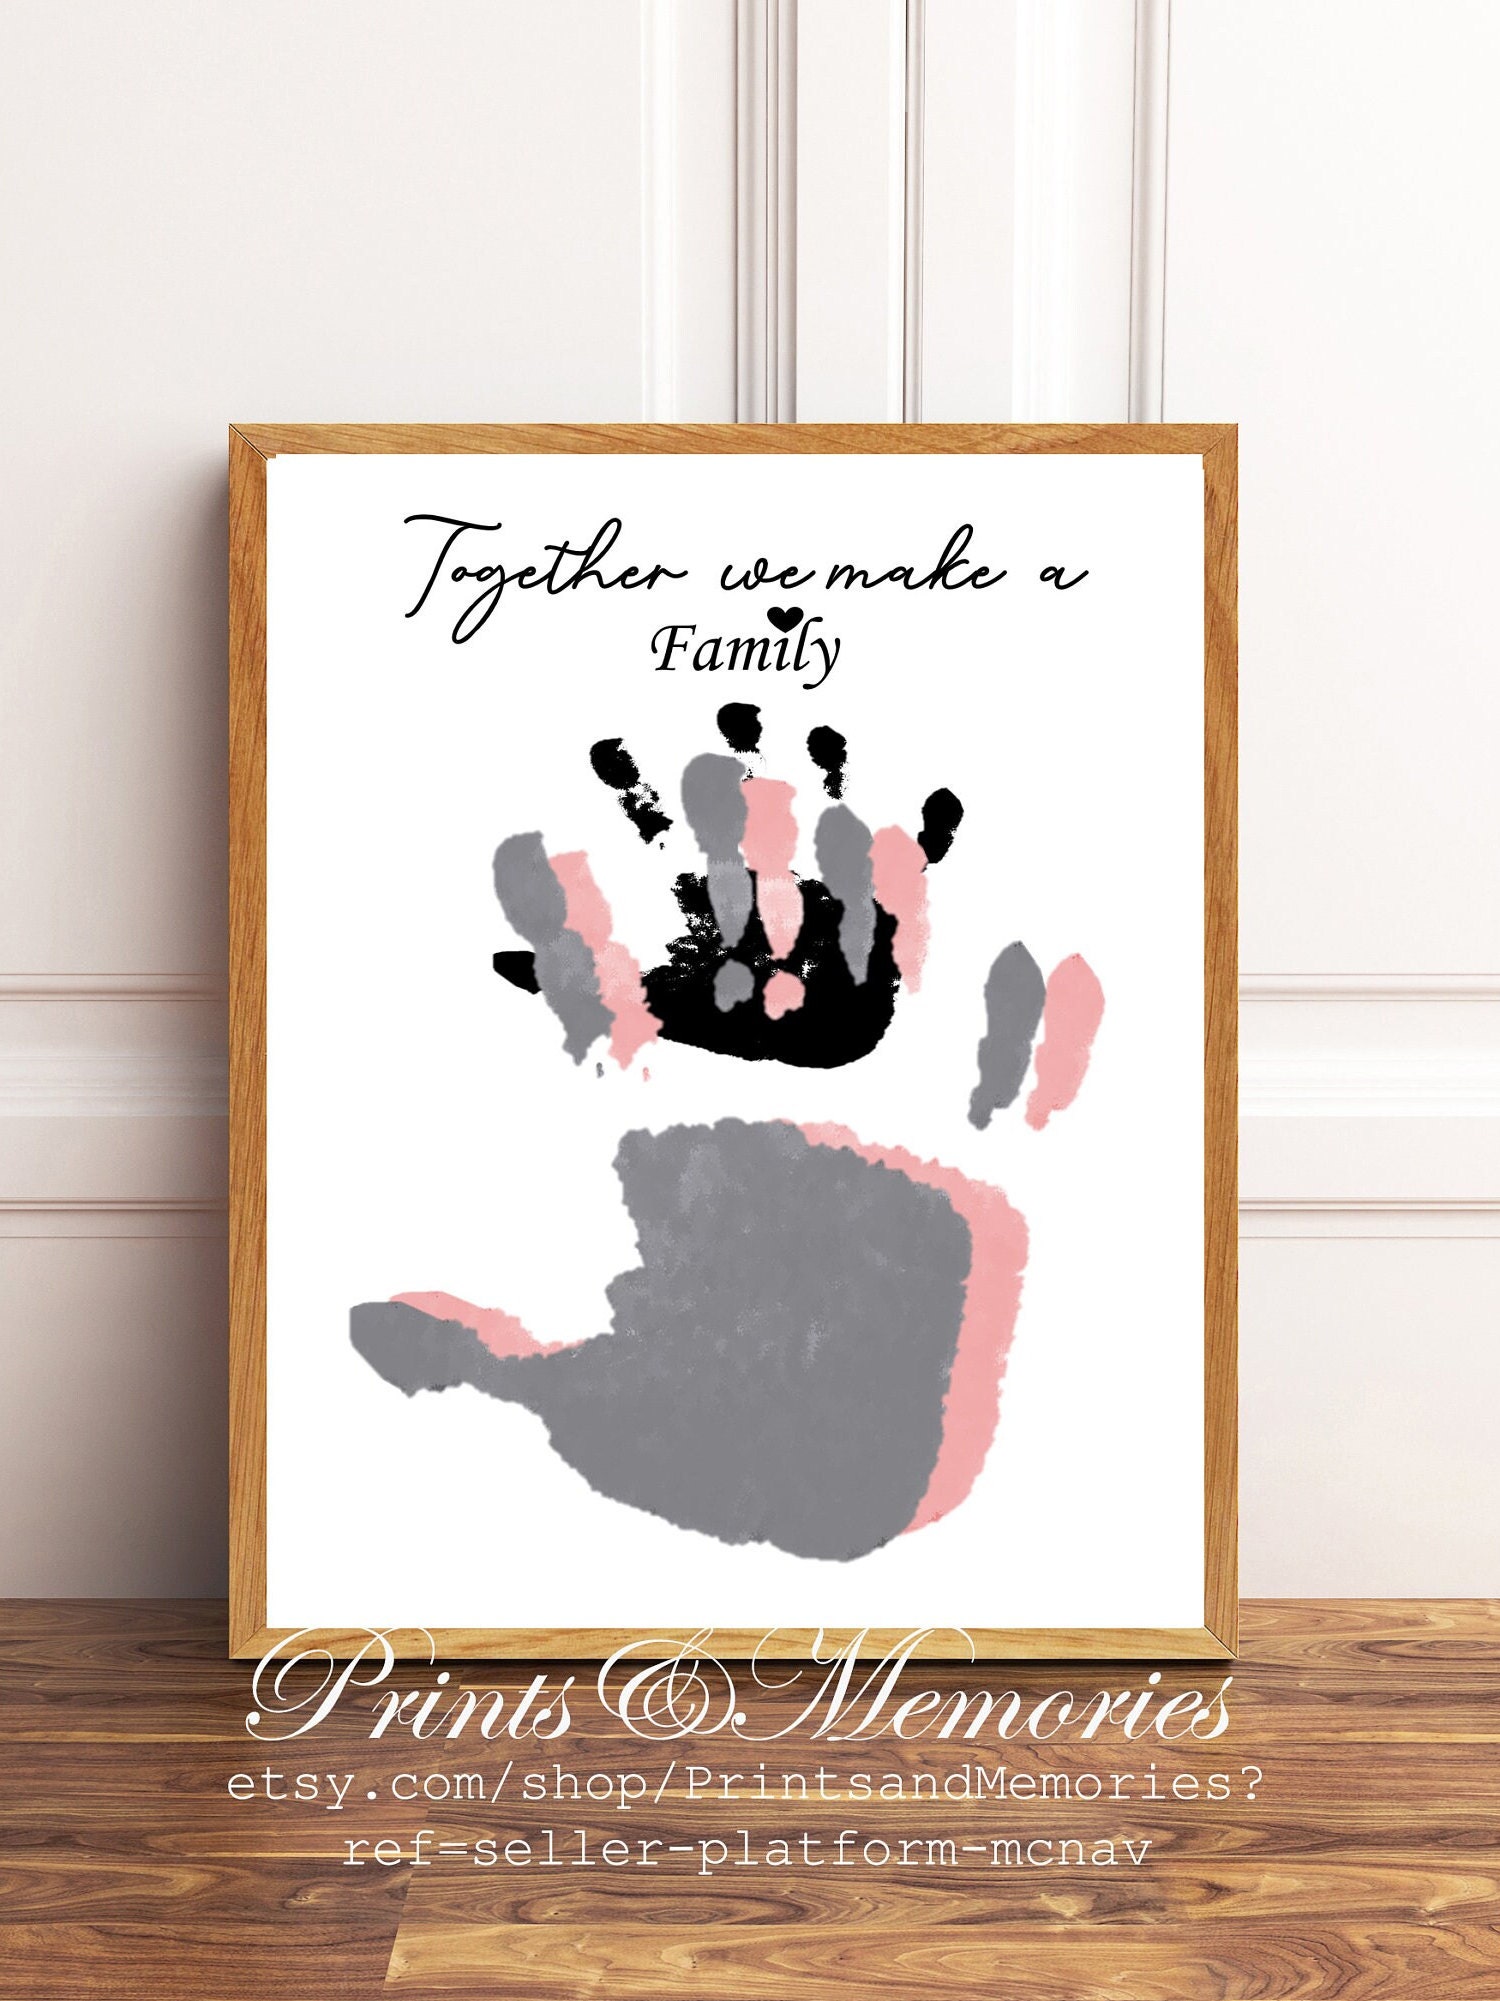 Make a Family Handprint Plaque with Mod Podge  Painting crafts, Family  crafts, Diy canvas wall art